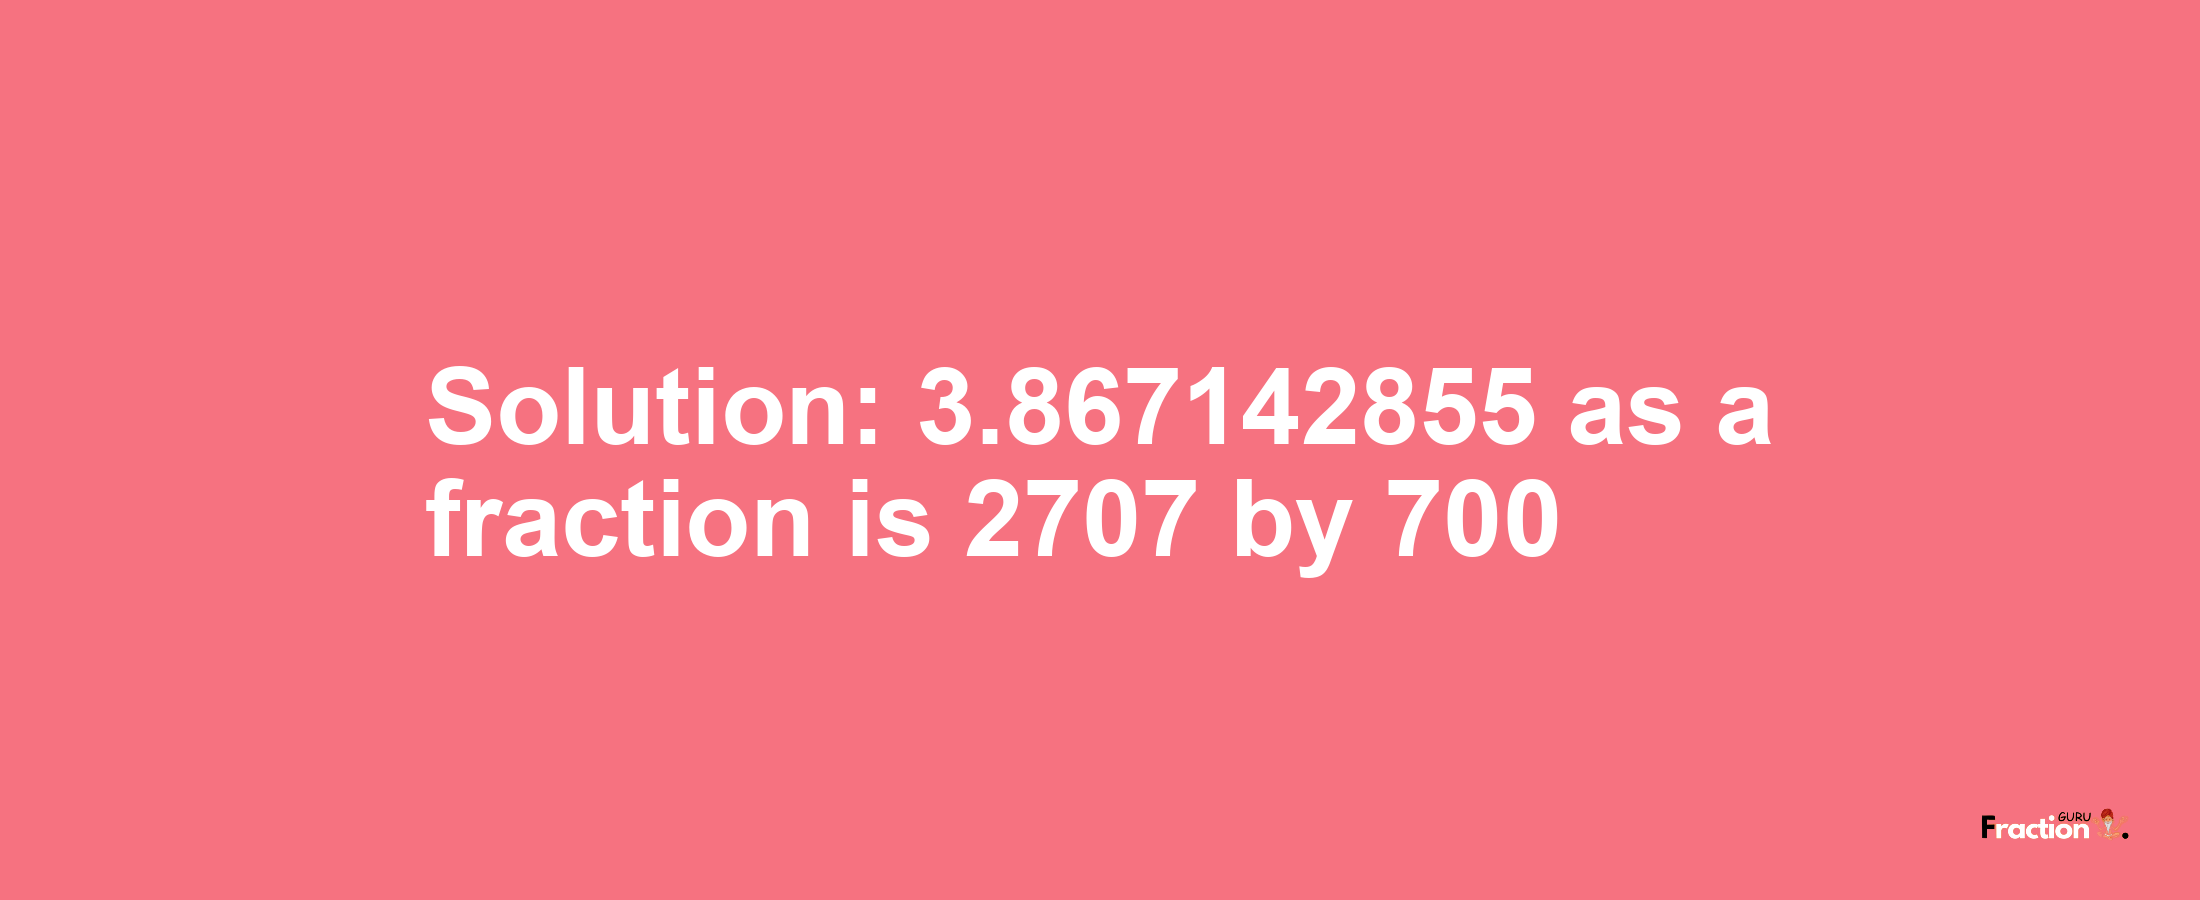 Solution:3.867142855 as a fraction is 2707/700